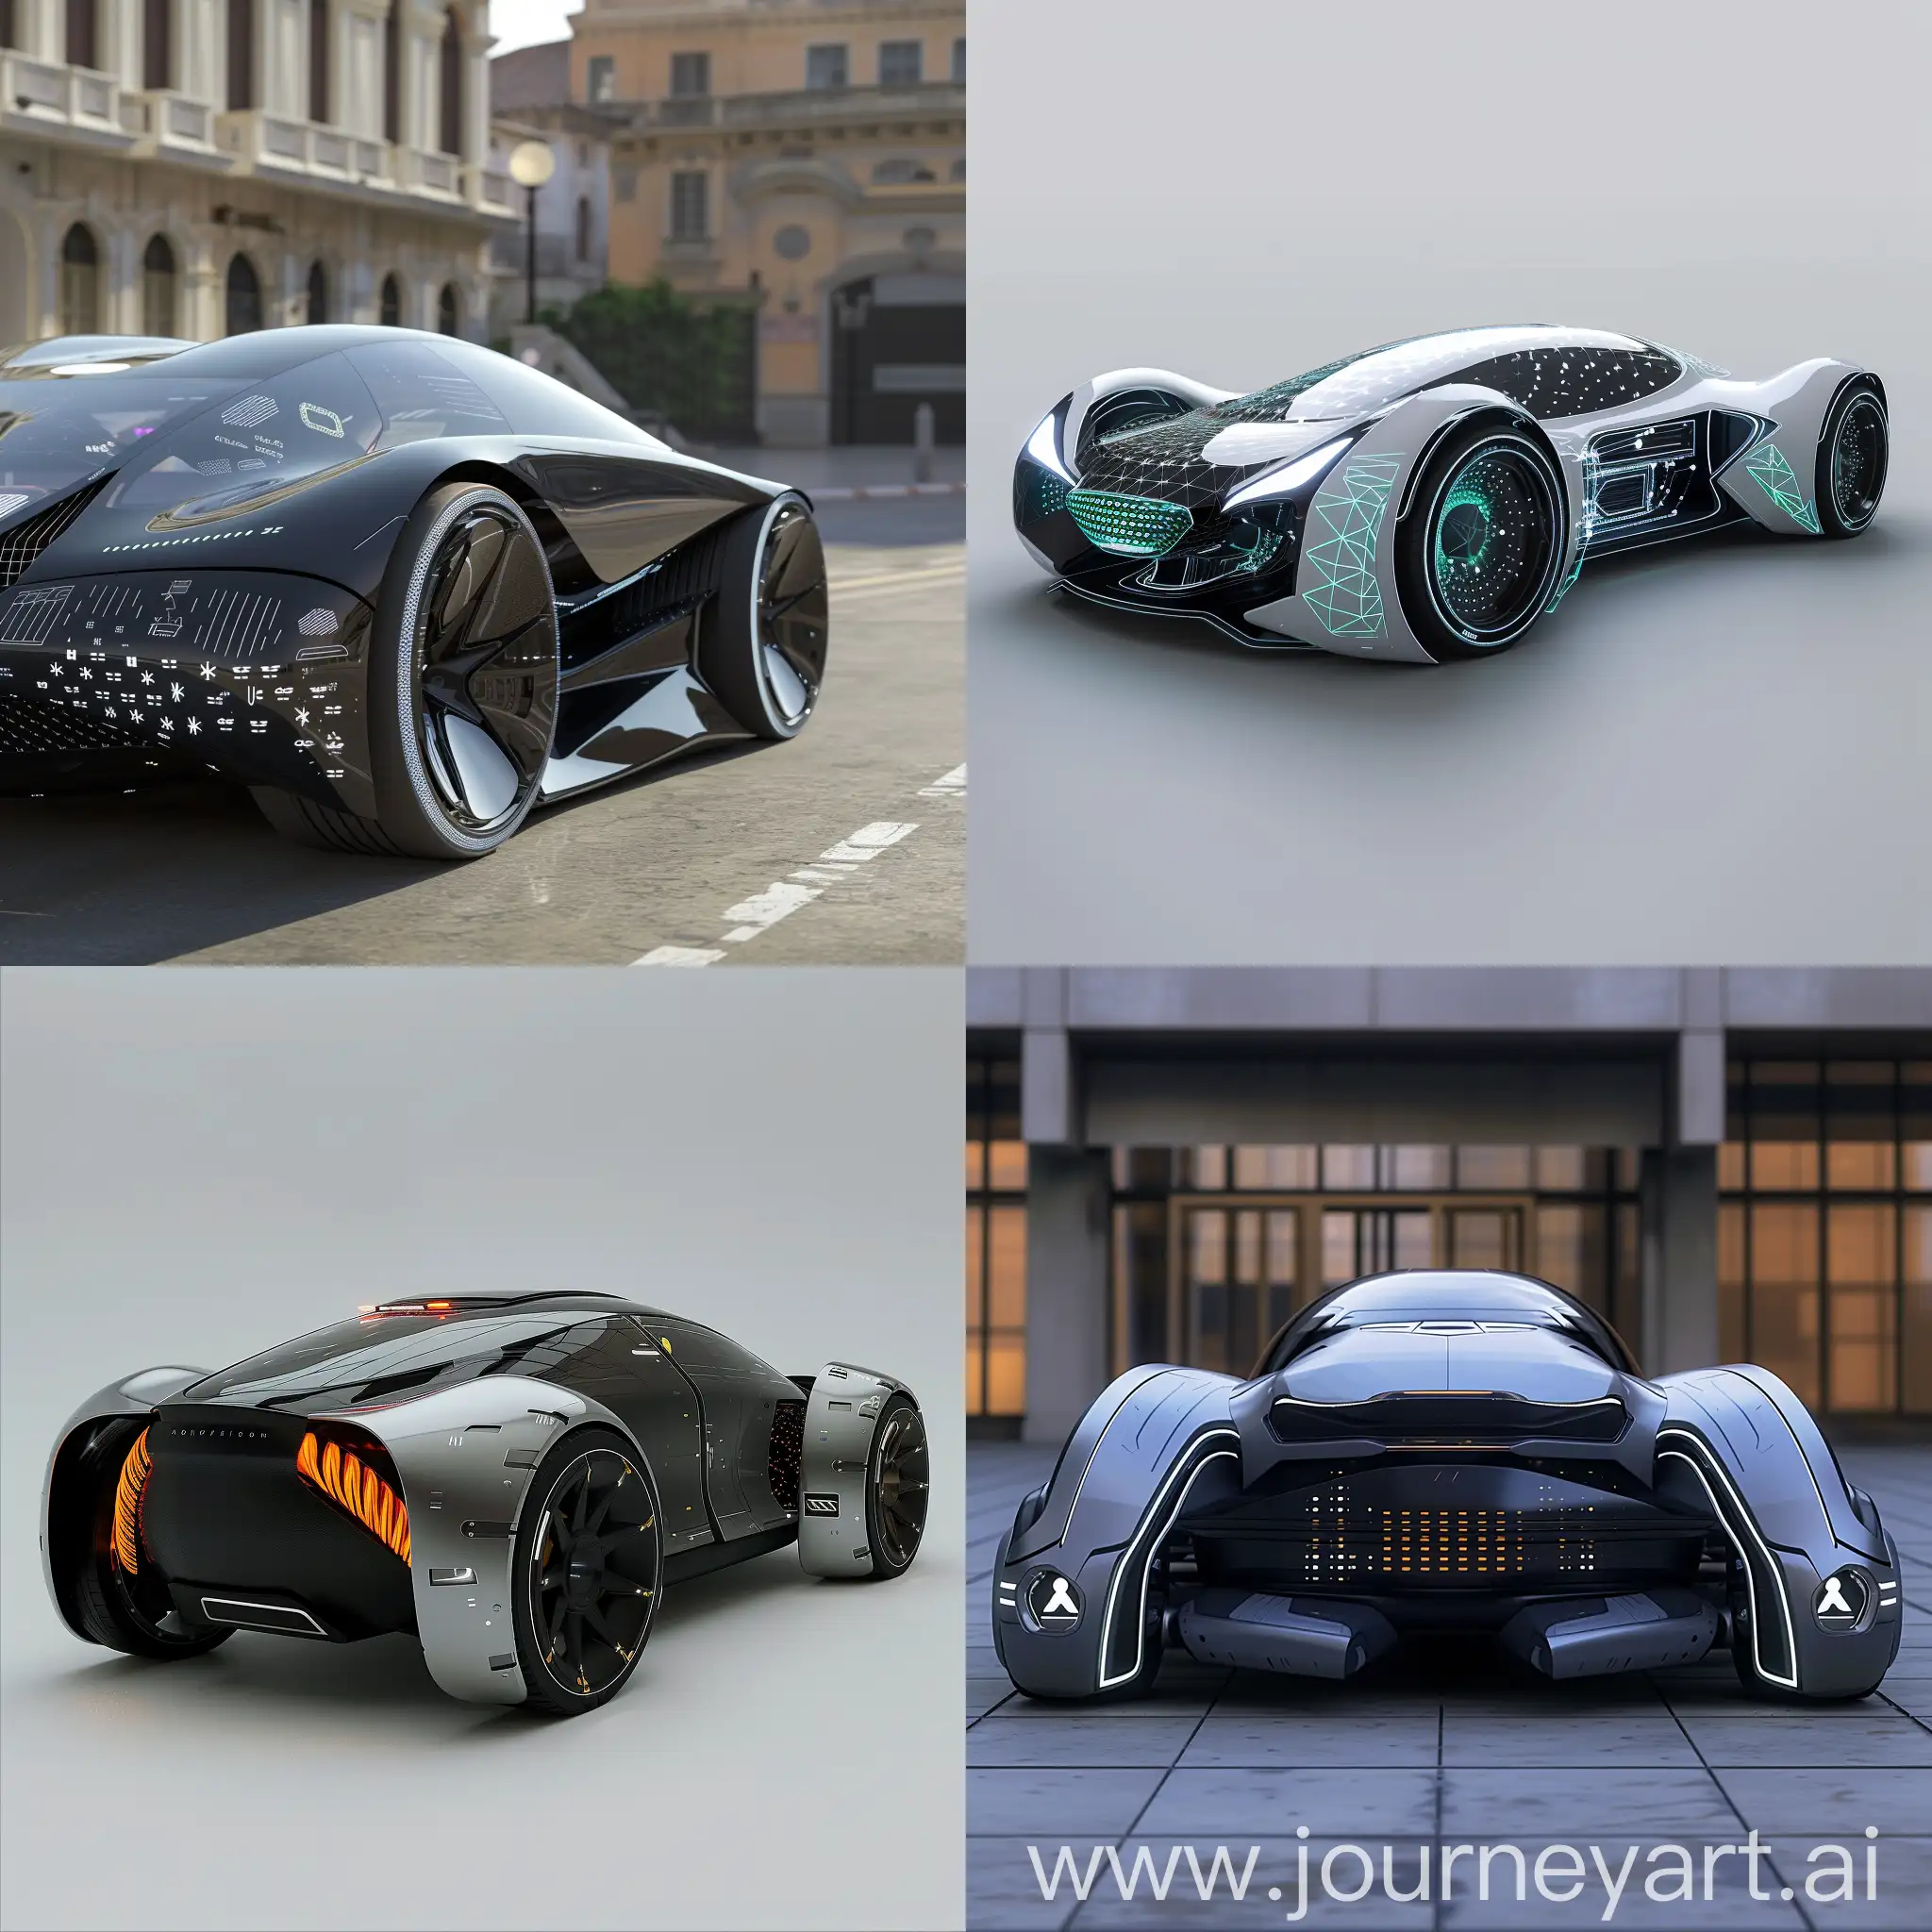 High-tech futuristic car, Autonomous Driving System, Energy-Efficient Powertrains, Regenerative Braking Systems, Active Aerodynamics, Advanced Telematics, Adaptive Suspension Systems, Smart Glass Technology, Lightweight Composite Materials, 3D-Printed Components, Wireless Charging Systems, High-Strength Steel Alloys, Corrosion-Resistant Coating, Thermal-Resistant Components:, Self-Healing Materials, Multi-Layer Insulation, Nano-Coatings, Shock-Absorbing Mounts, Modular Design, Robust Electrical Connectors, Over-Engineered Fasteners, Aerodynamic Sculpting, Interactive Lighting, Solar Panel Integration, Active Grille Shutters, Morphing Body Panels, Electrochromic Paint, Holographic Display, Lidar and Radar Systems, Flush Door Handles, Smart Wheels, Impact-Resistant Glass, Scratch-Proof Coatings, Reinforced Bumpers, All-Weather Tires, Flexible Panel Joints, UV-Resistant Clear Coat, Water Harvesting System, Dirt-Repellent Surfaces, Temperature-Adaptive Materials, Rust-Proof Underbody, unreal engine 5 --stylize 1000